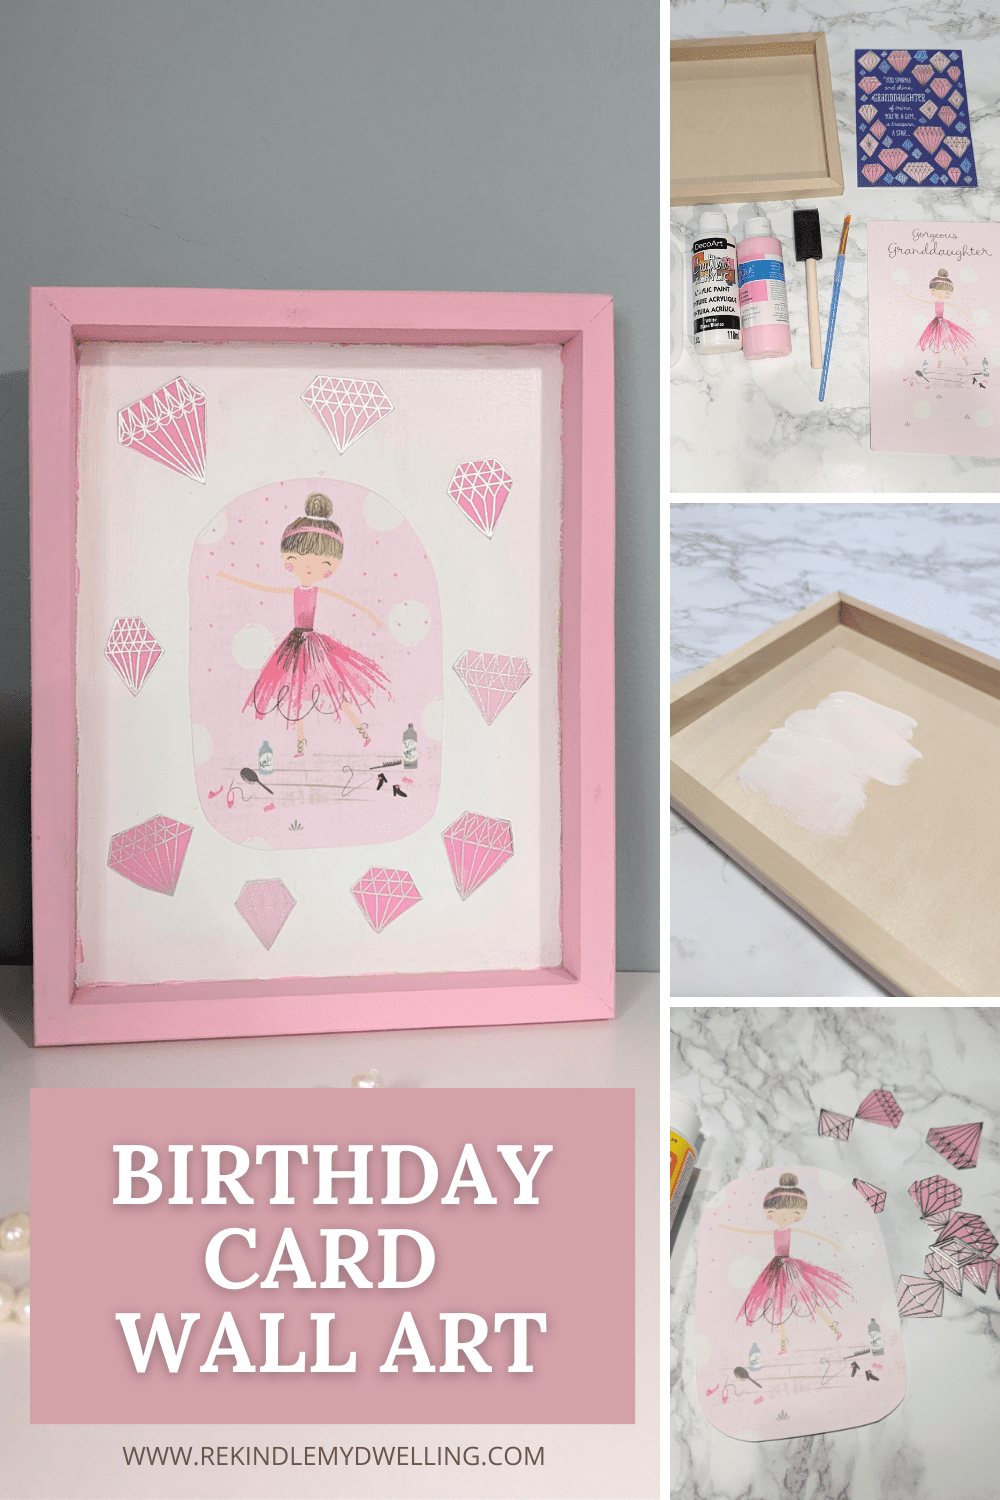 Collage of process showing how to make wall art using birthday cards.